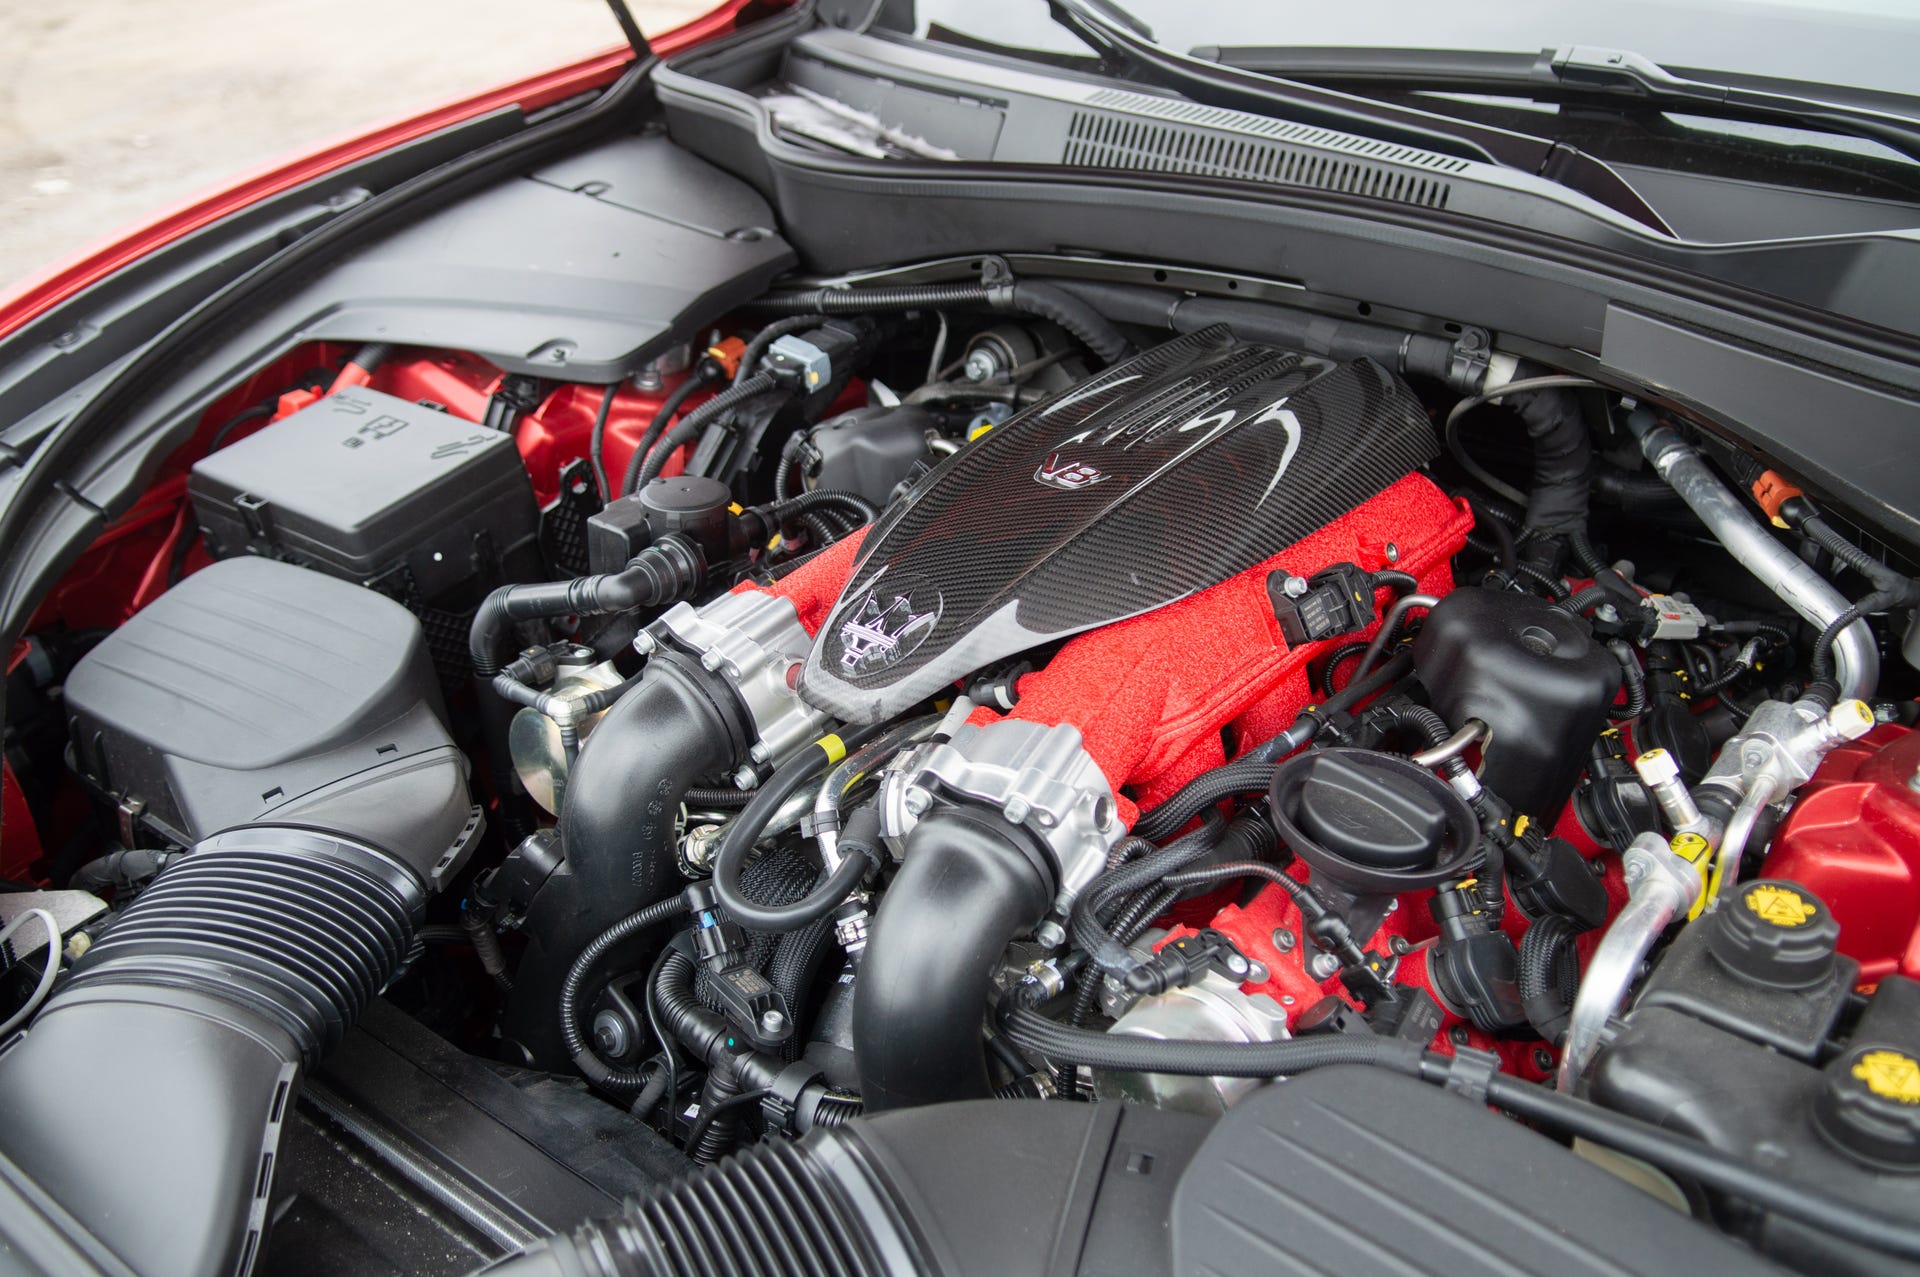 2022 Maserati Levante Trofeo, showing the engine bay and its many red elements